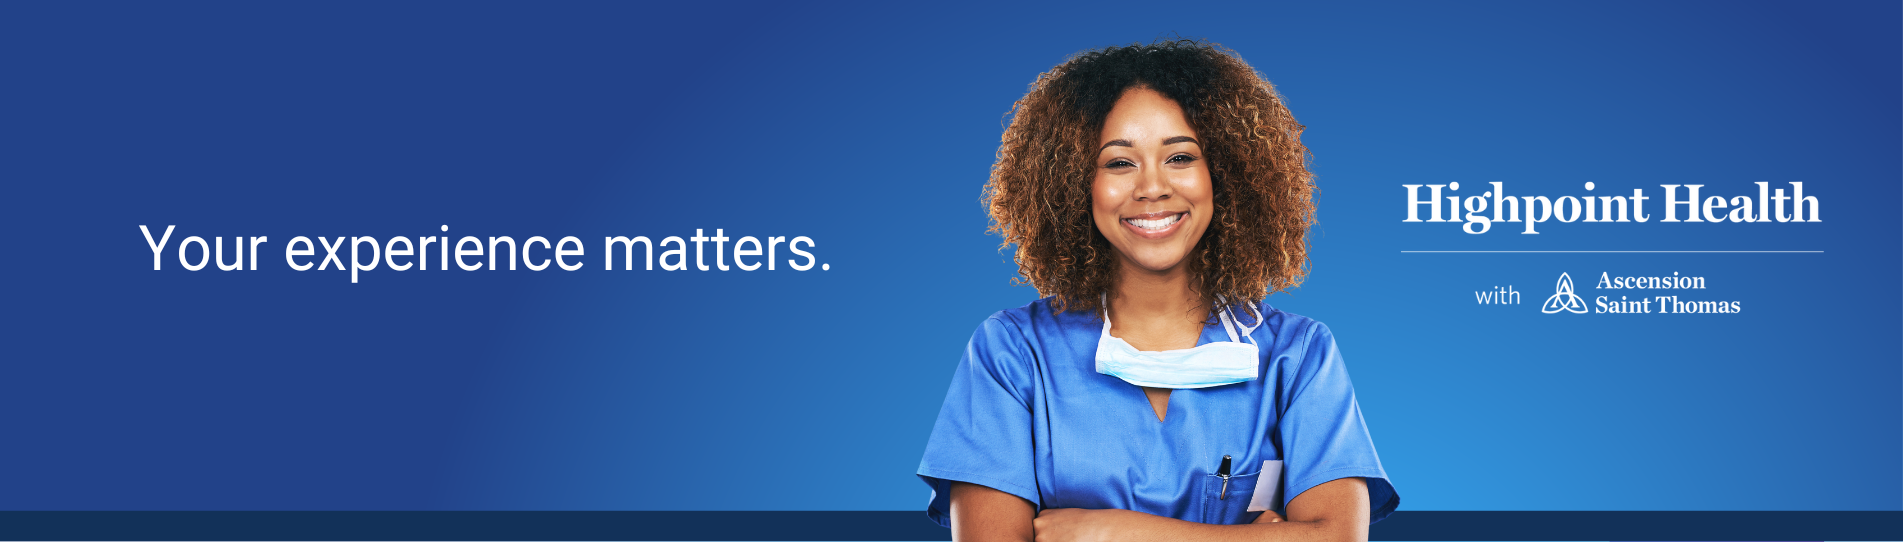 Banner graphic with image of nurse and text "your experience matters."